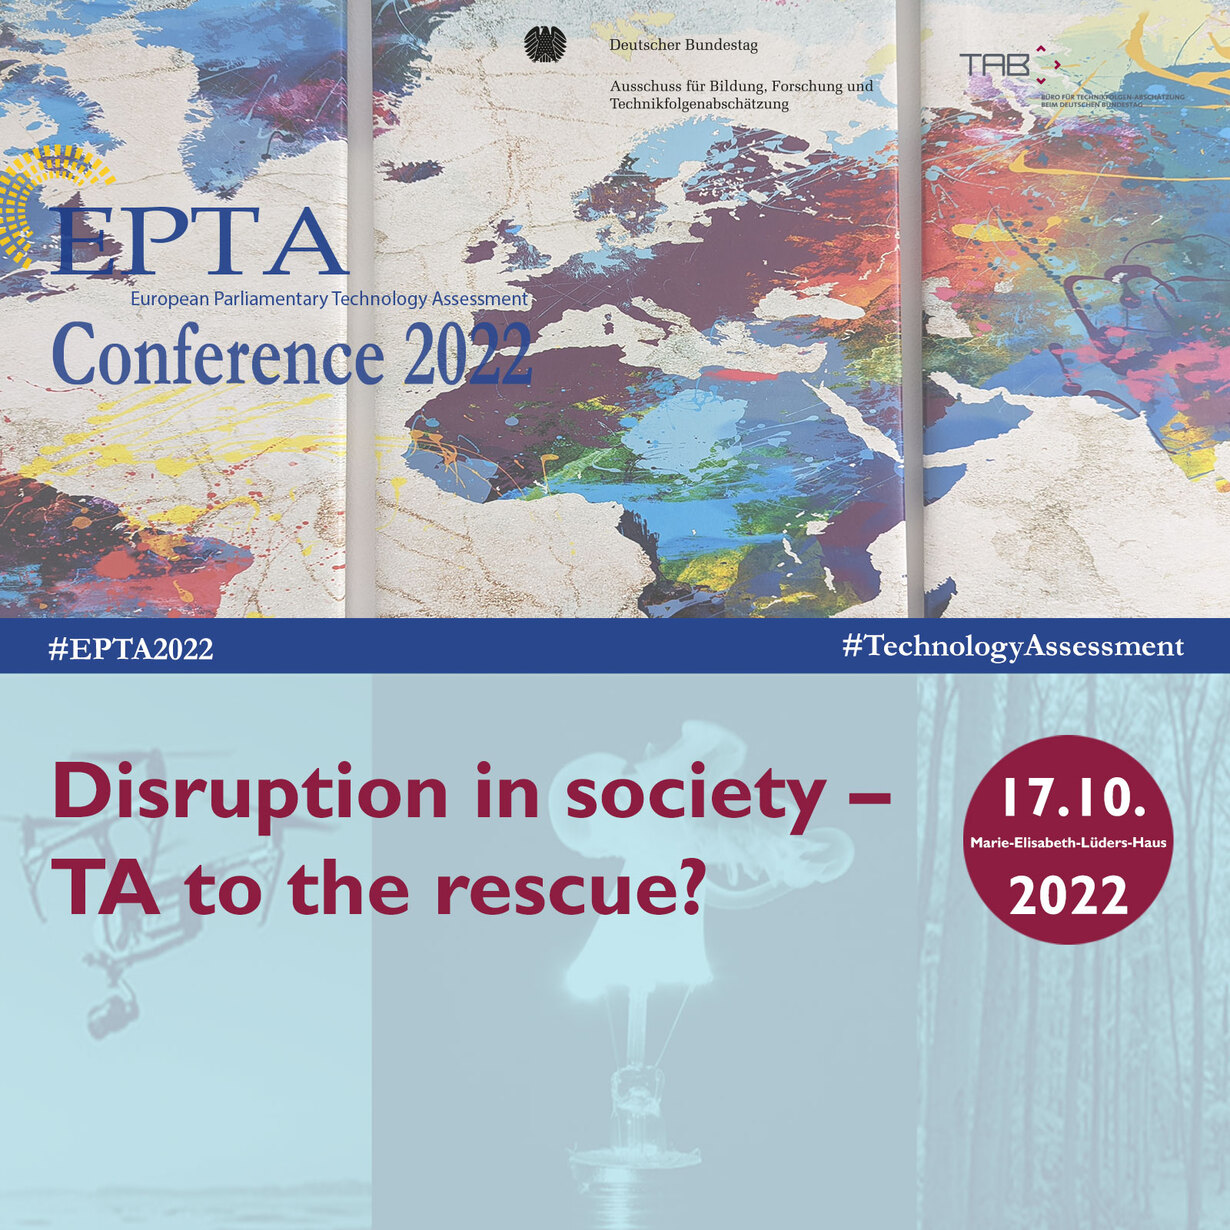 Plakat EPTA-Konferenz "Disruption in society - TA to the rescue" with a colorfull worldmap epta-logo bundestaglogo and symbolic pictures of projects aws - forrests - critis